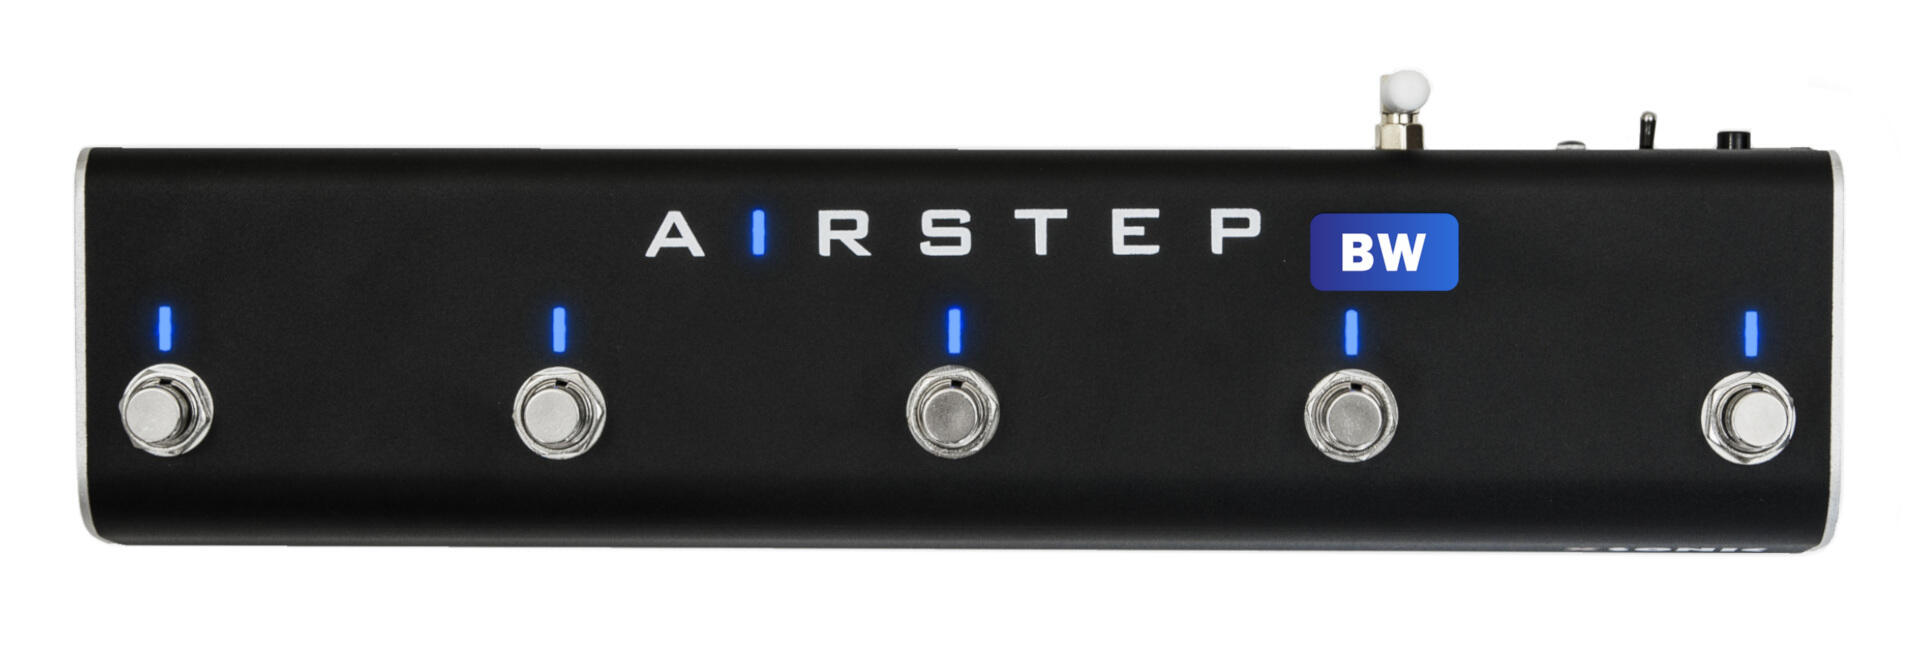 beginsel voorspelling Schurend XSonic Airstep BW Edition - Wireless Footswitch for Katana Air and Waza Air  | W-Music Distribution